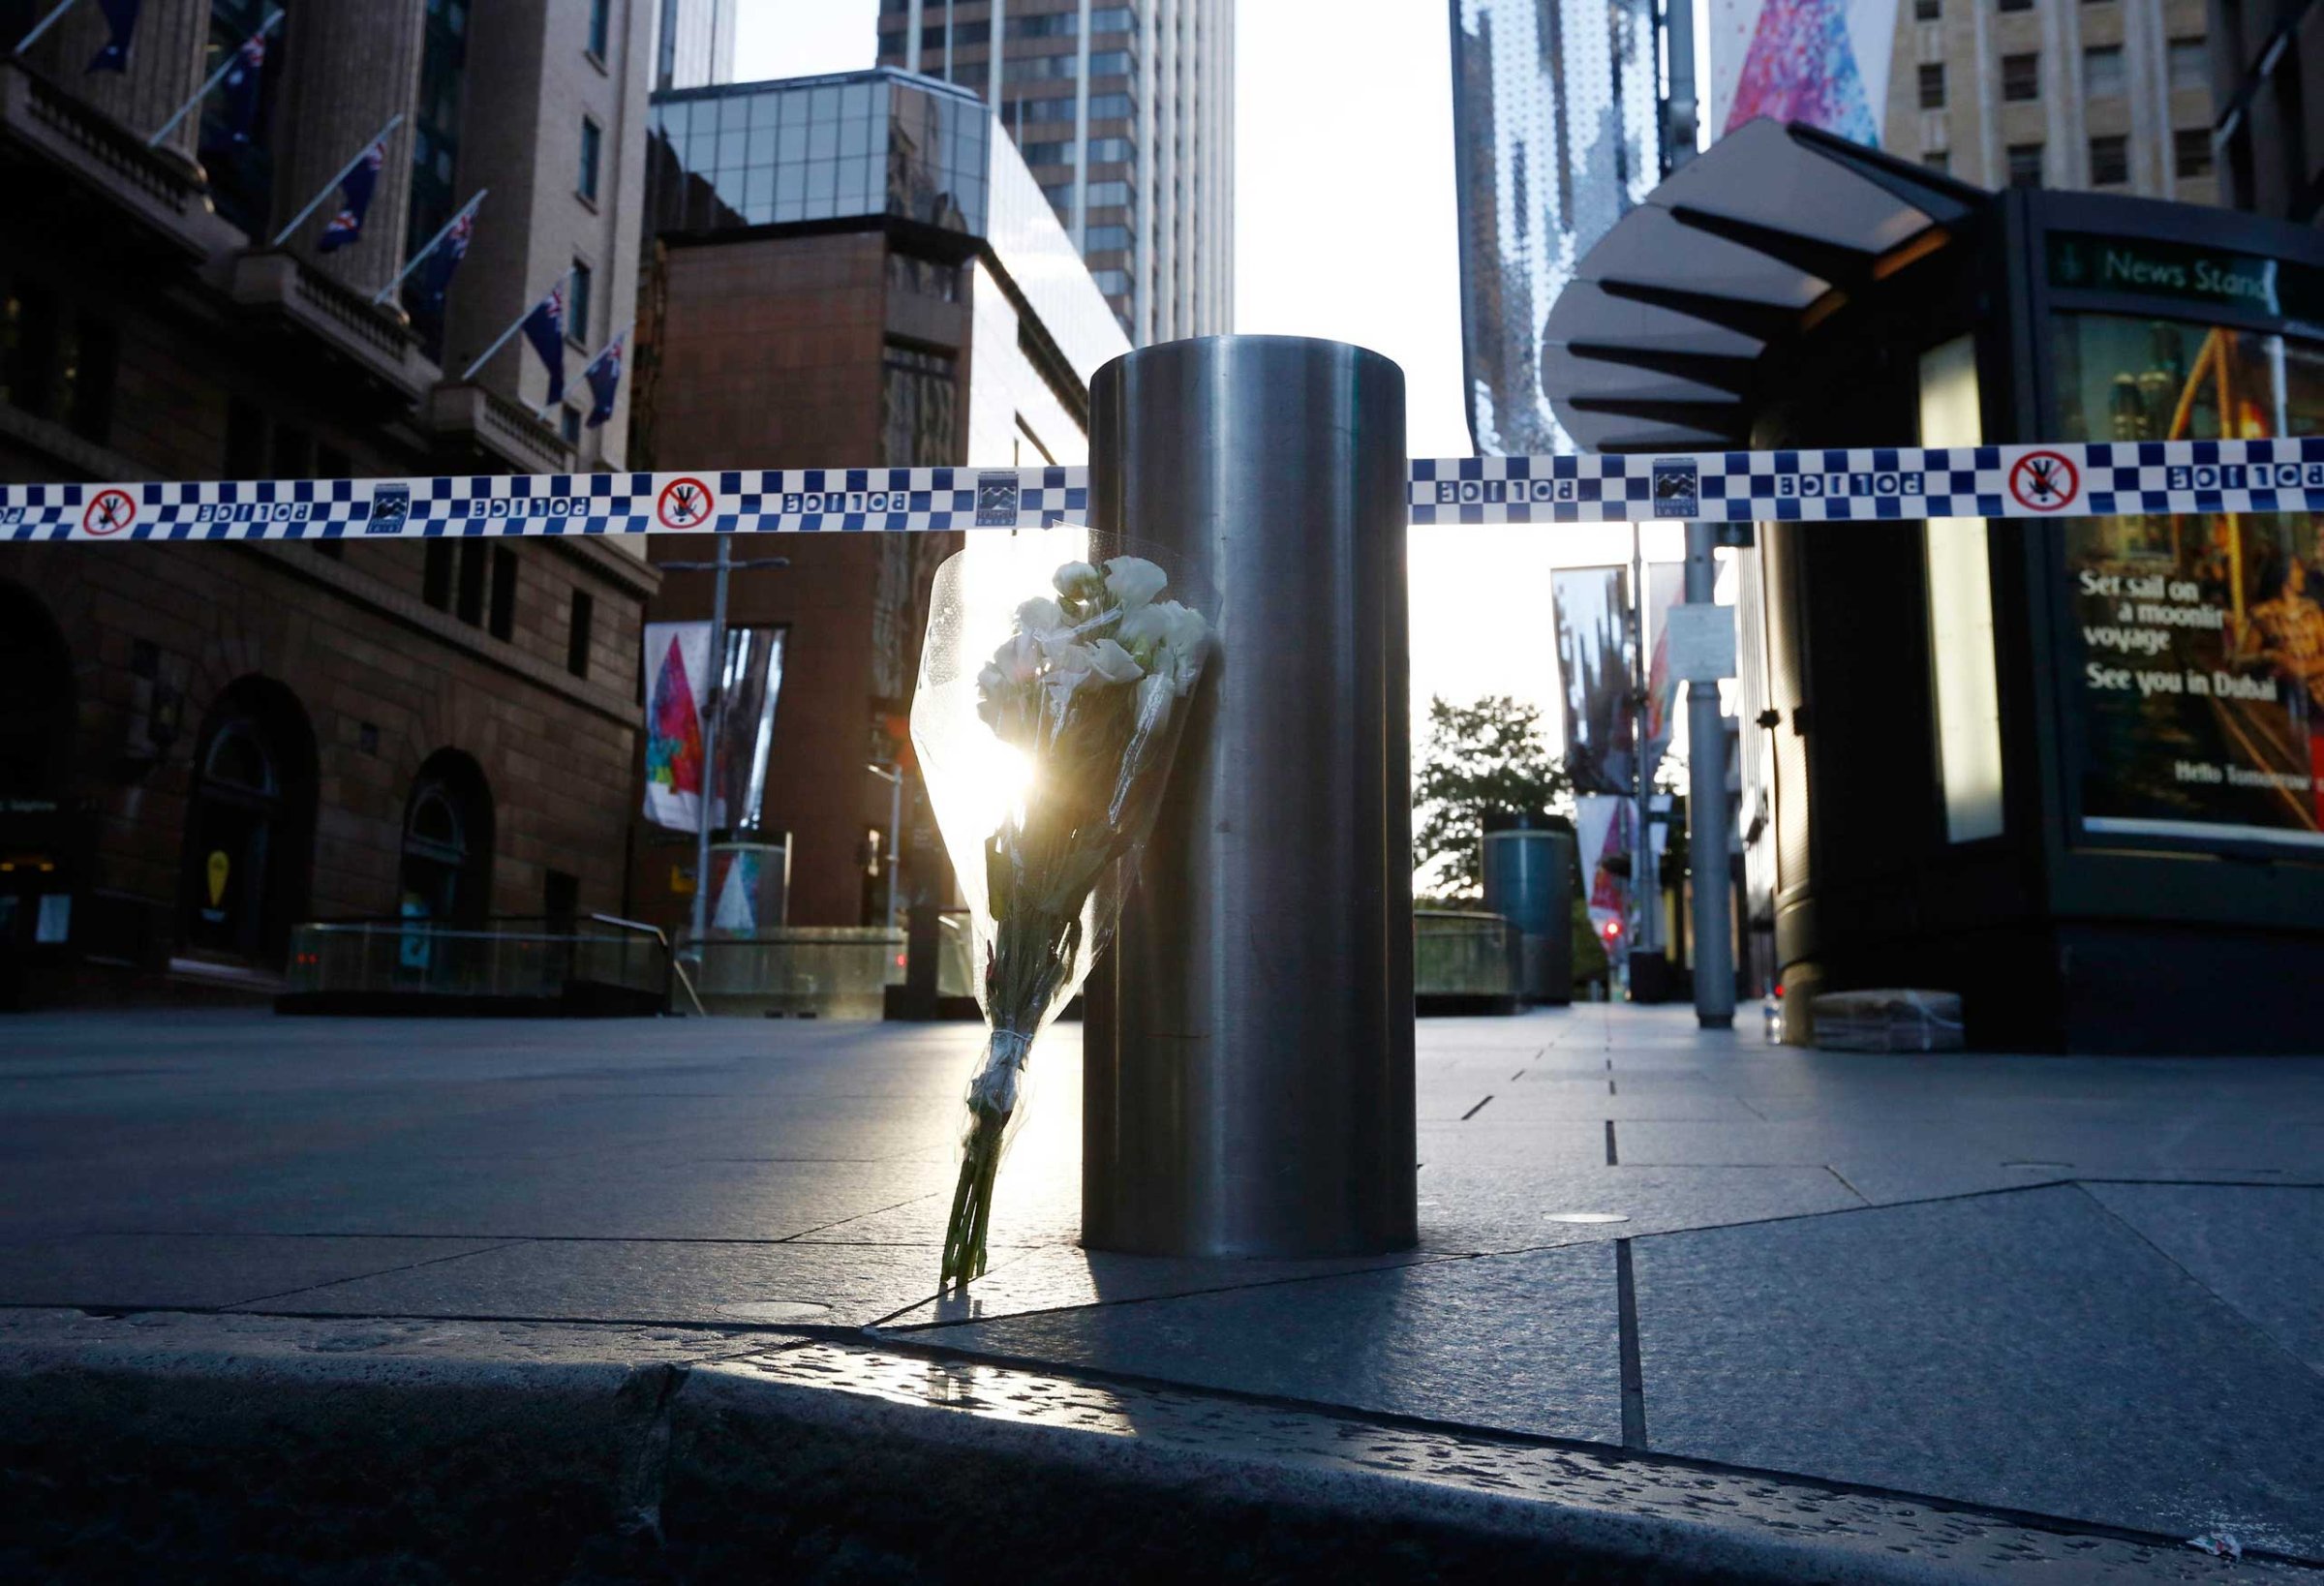 A bouquet is pictured under police tape near the cordoned-off scene of a hostage taking at Martin Place after it ended, early on Dec. 16, 2014.